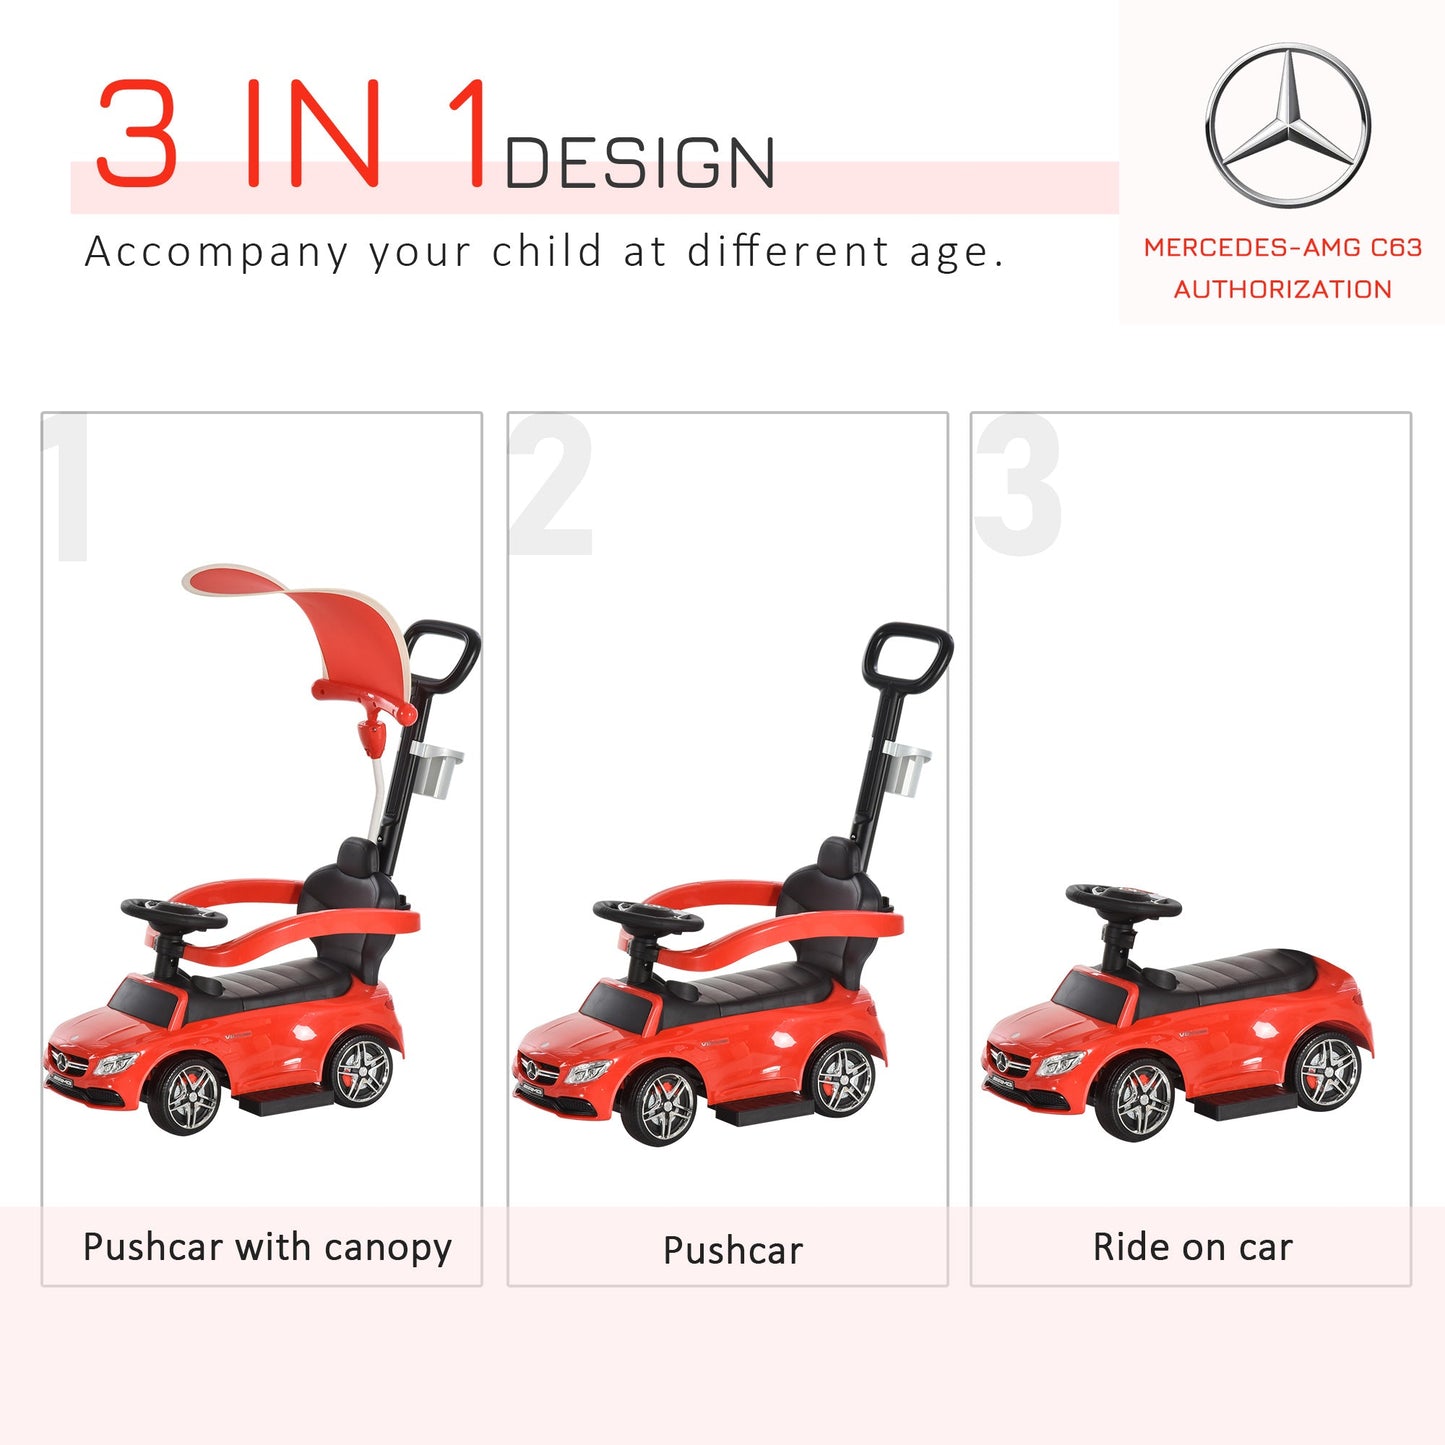 Toys and Games-3 in 1 Kids Ride On Push Car, Toddler Stroller Walking Sliding Toy Car with Sun Canopy Horn Sound Safety Bar Cup Holder for 12-36 Months, Red - Outdoor Style Company